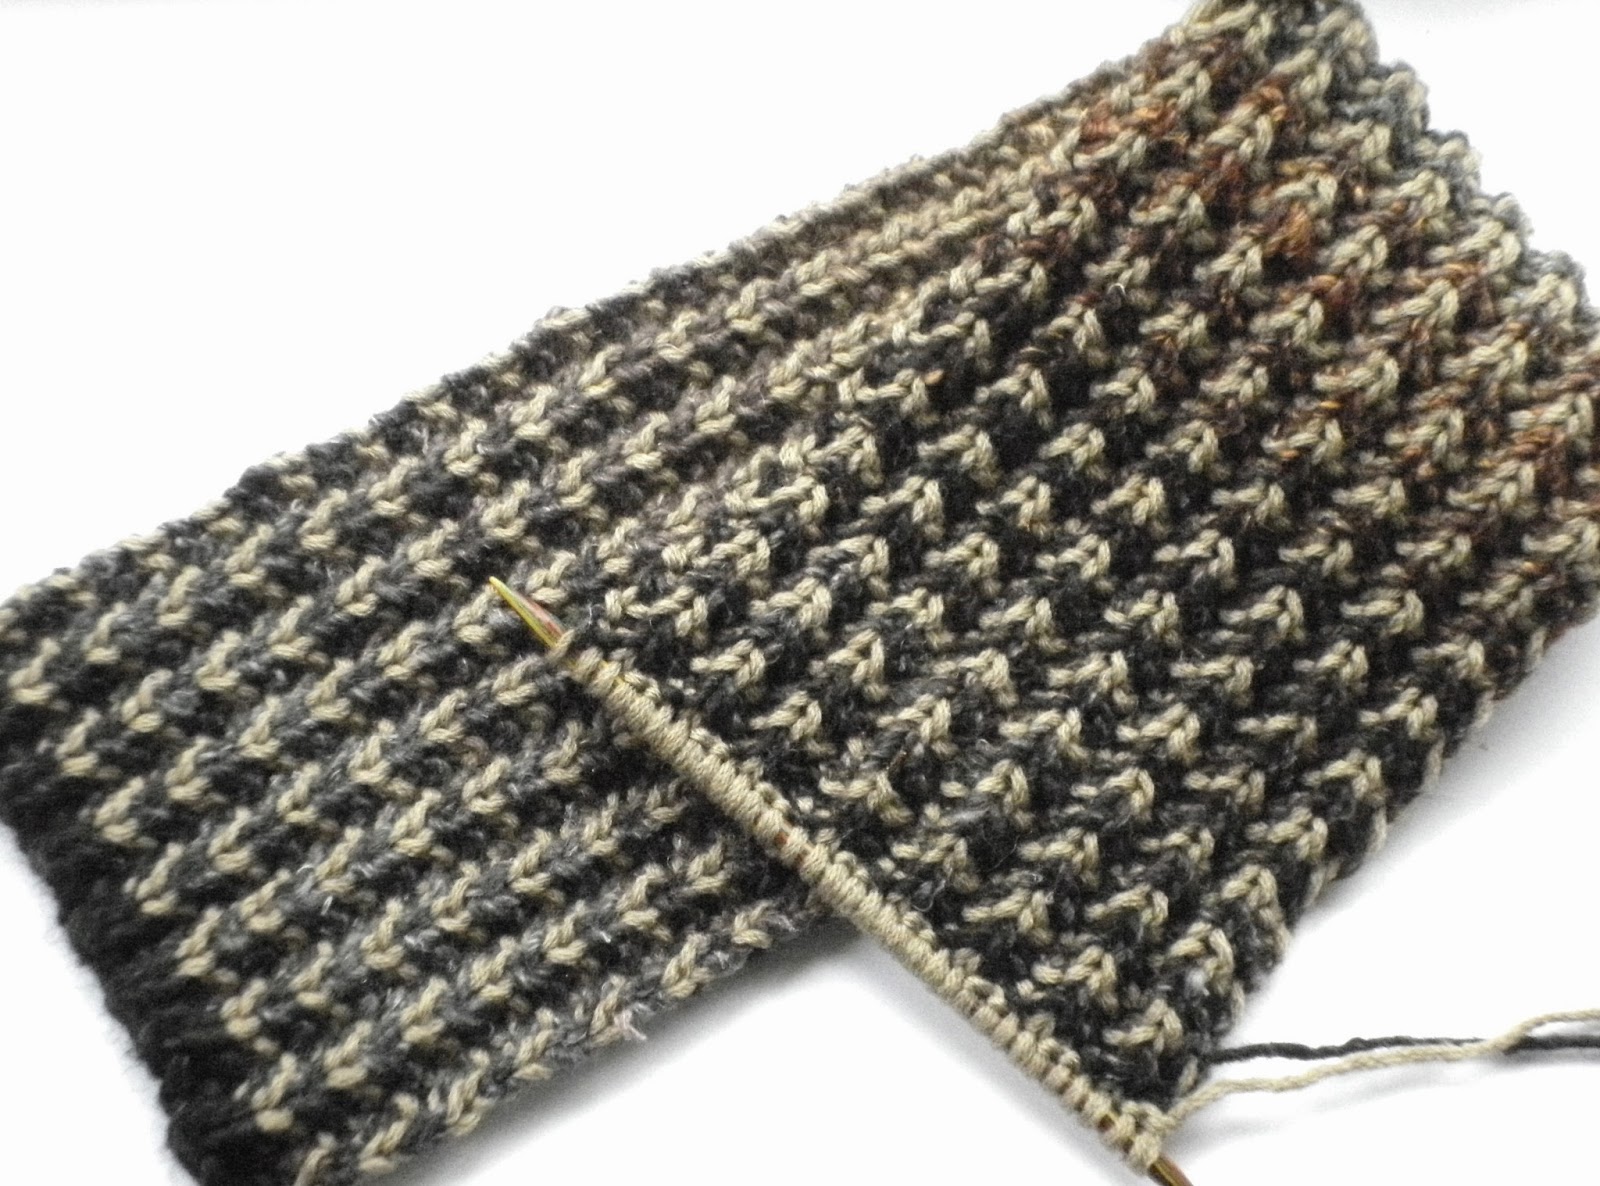 Easy scarf patterns to knit